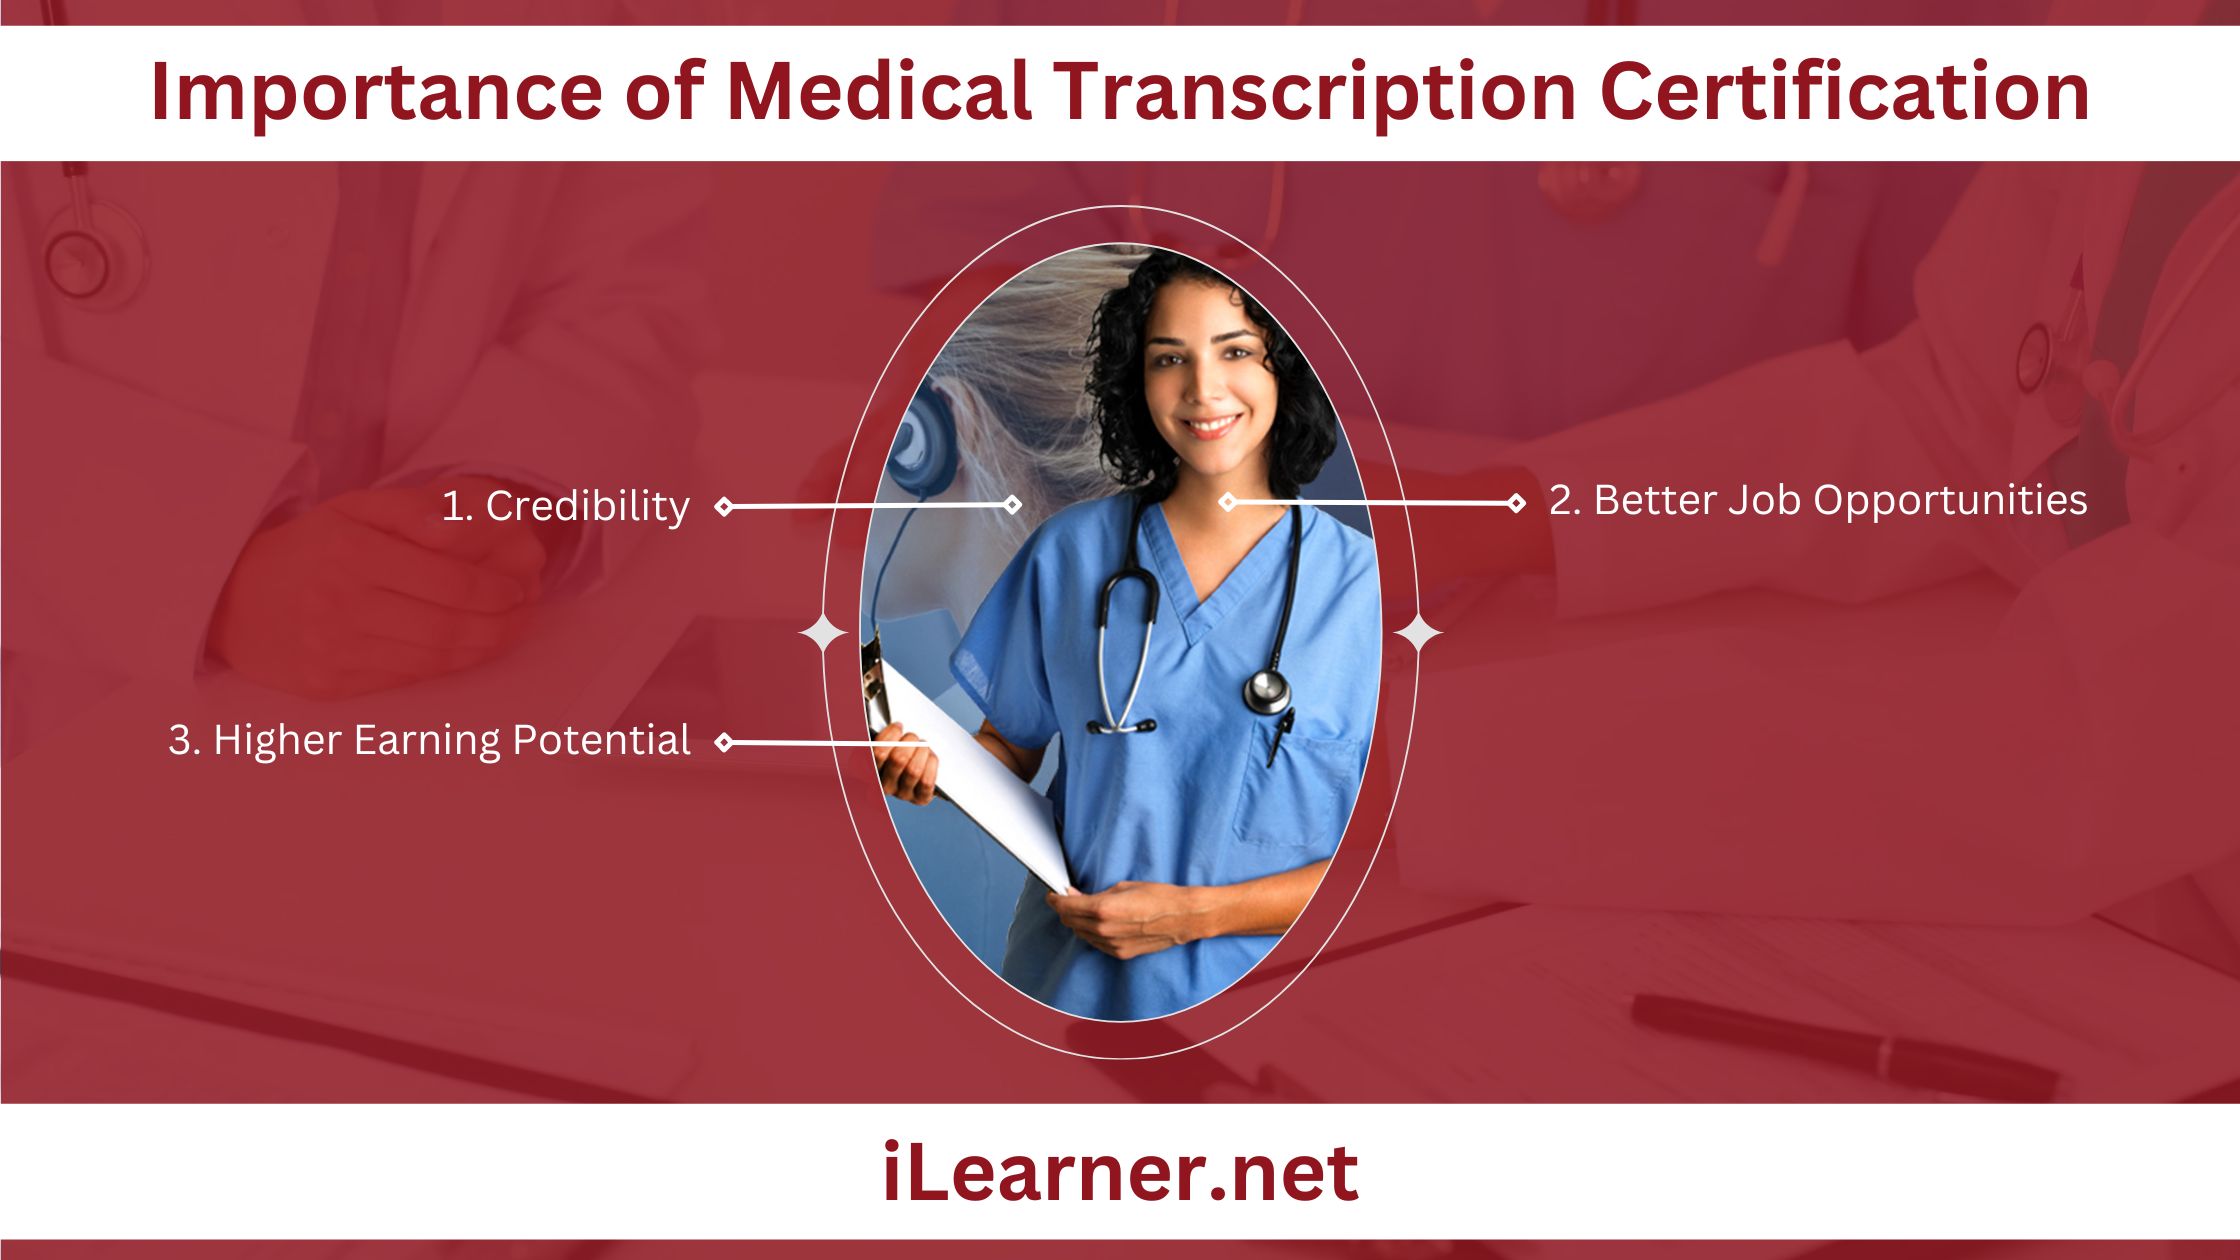 Importance of Medical Transcription Certification - Infographic